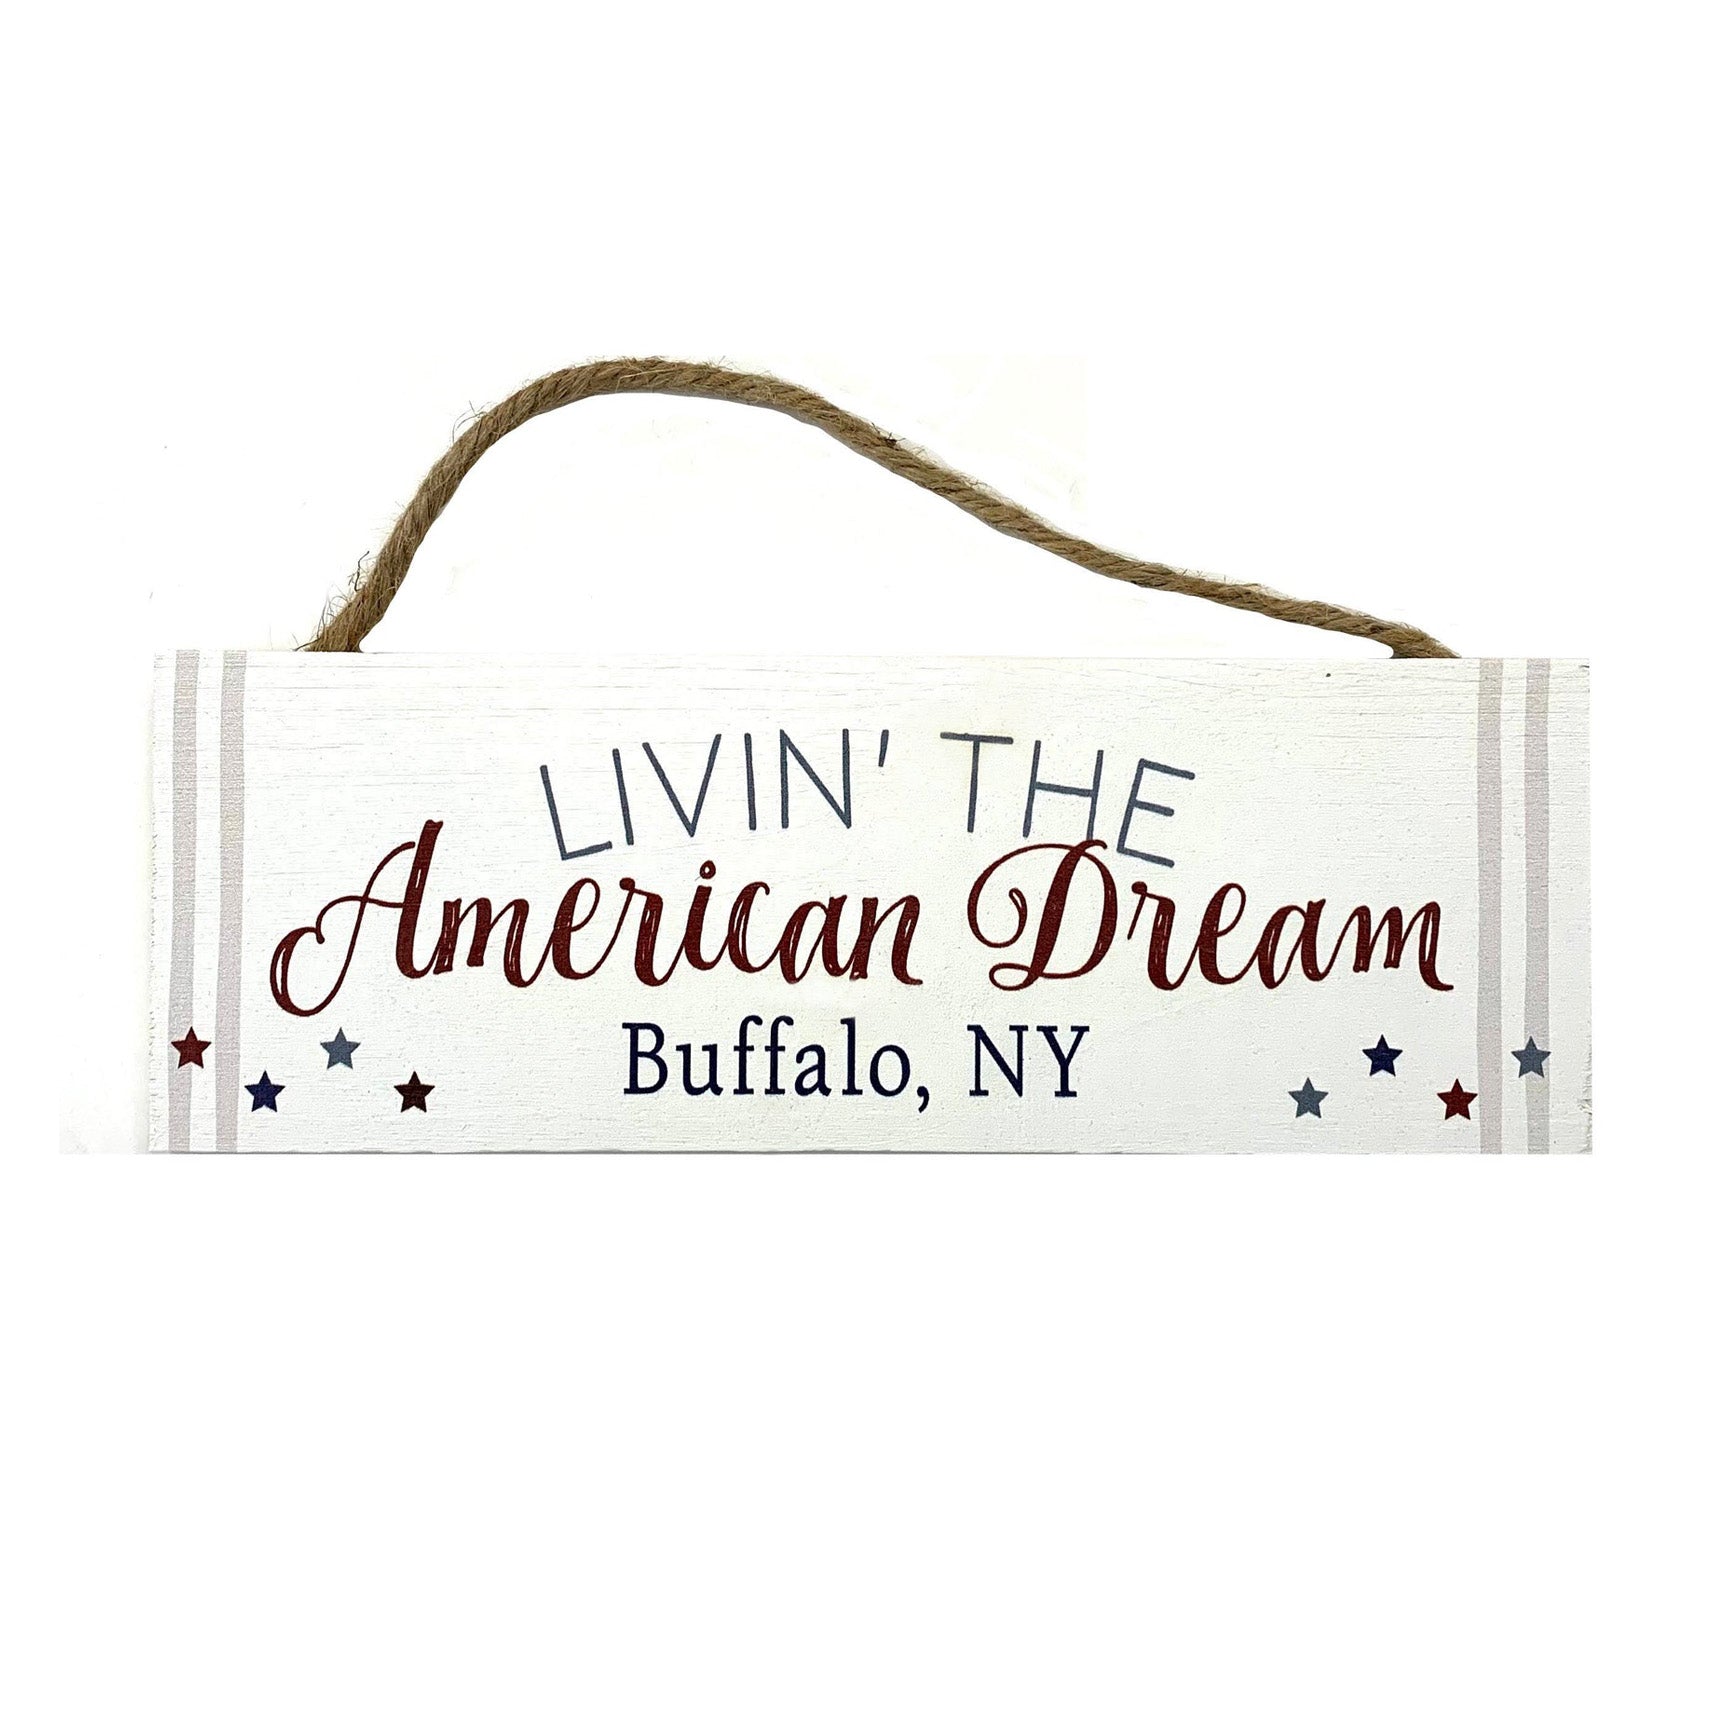 "Livin' The American Dream" Wooden Sign